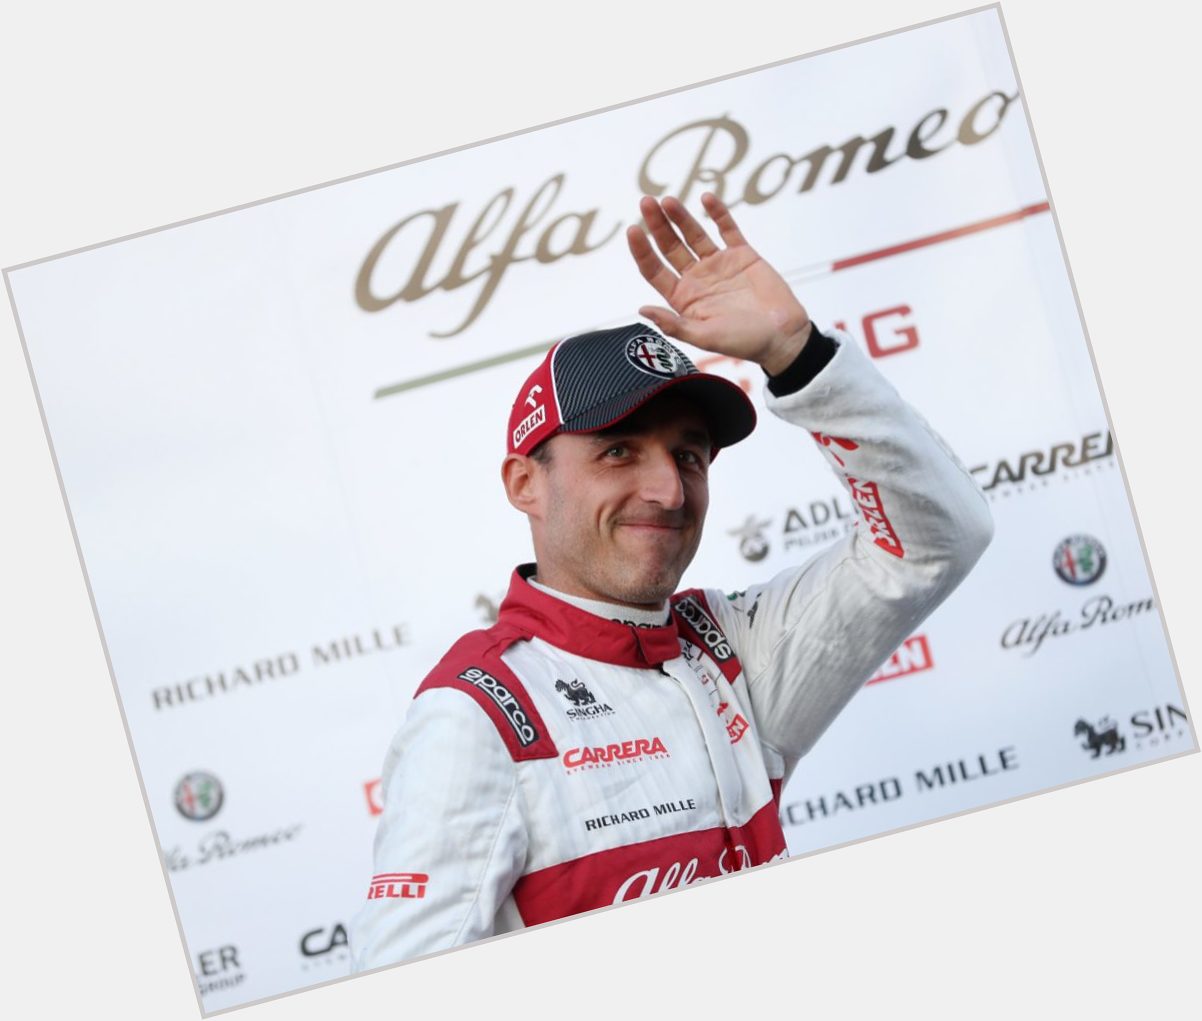 A very Happy Birthday to the superhuman that is Robert Kubica!

He turns 36 today! 